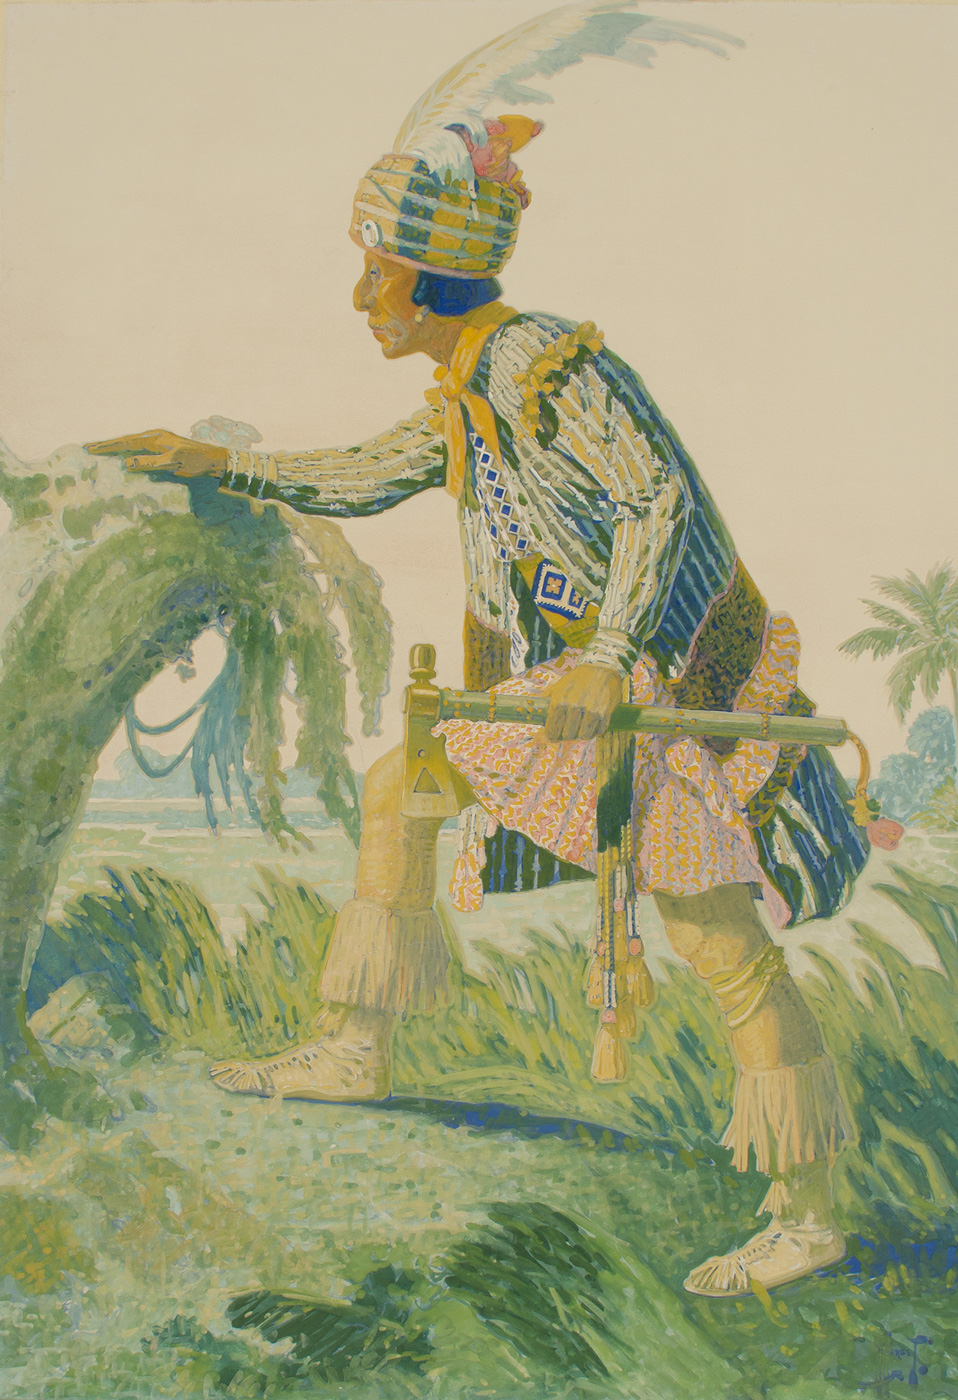 A full length portrait of a Seminole man in tribal clothing.